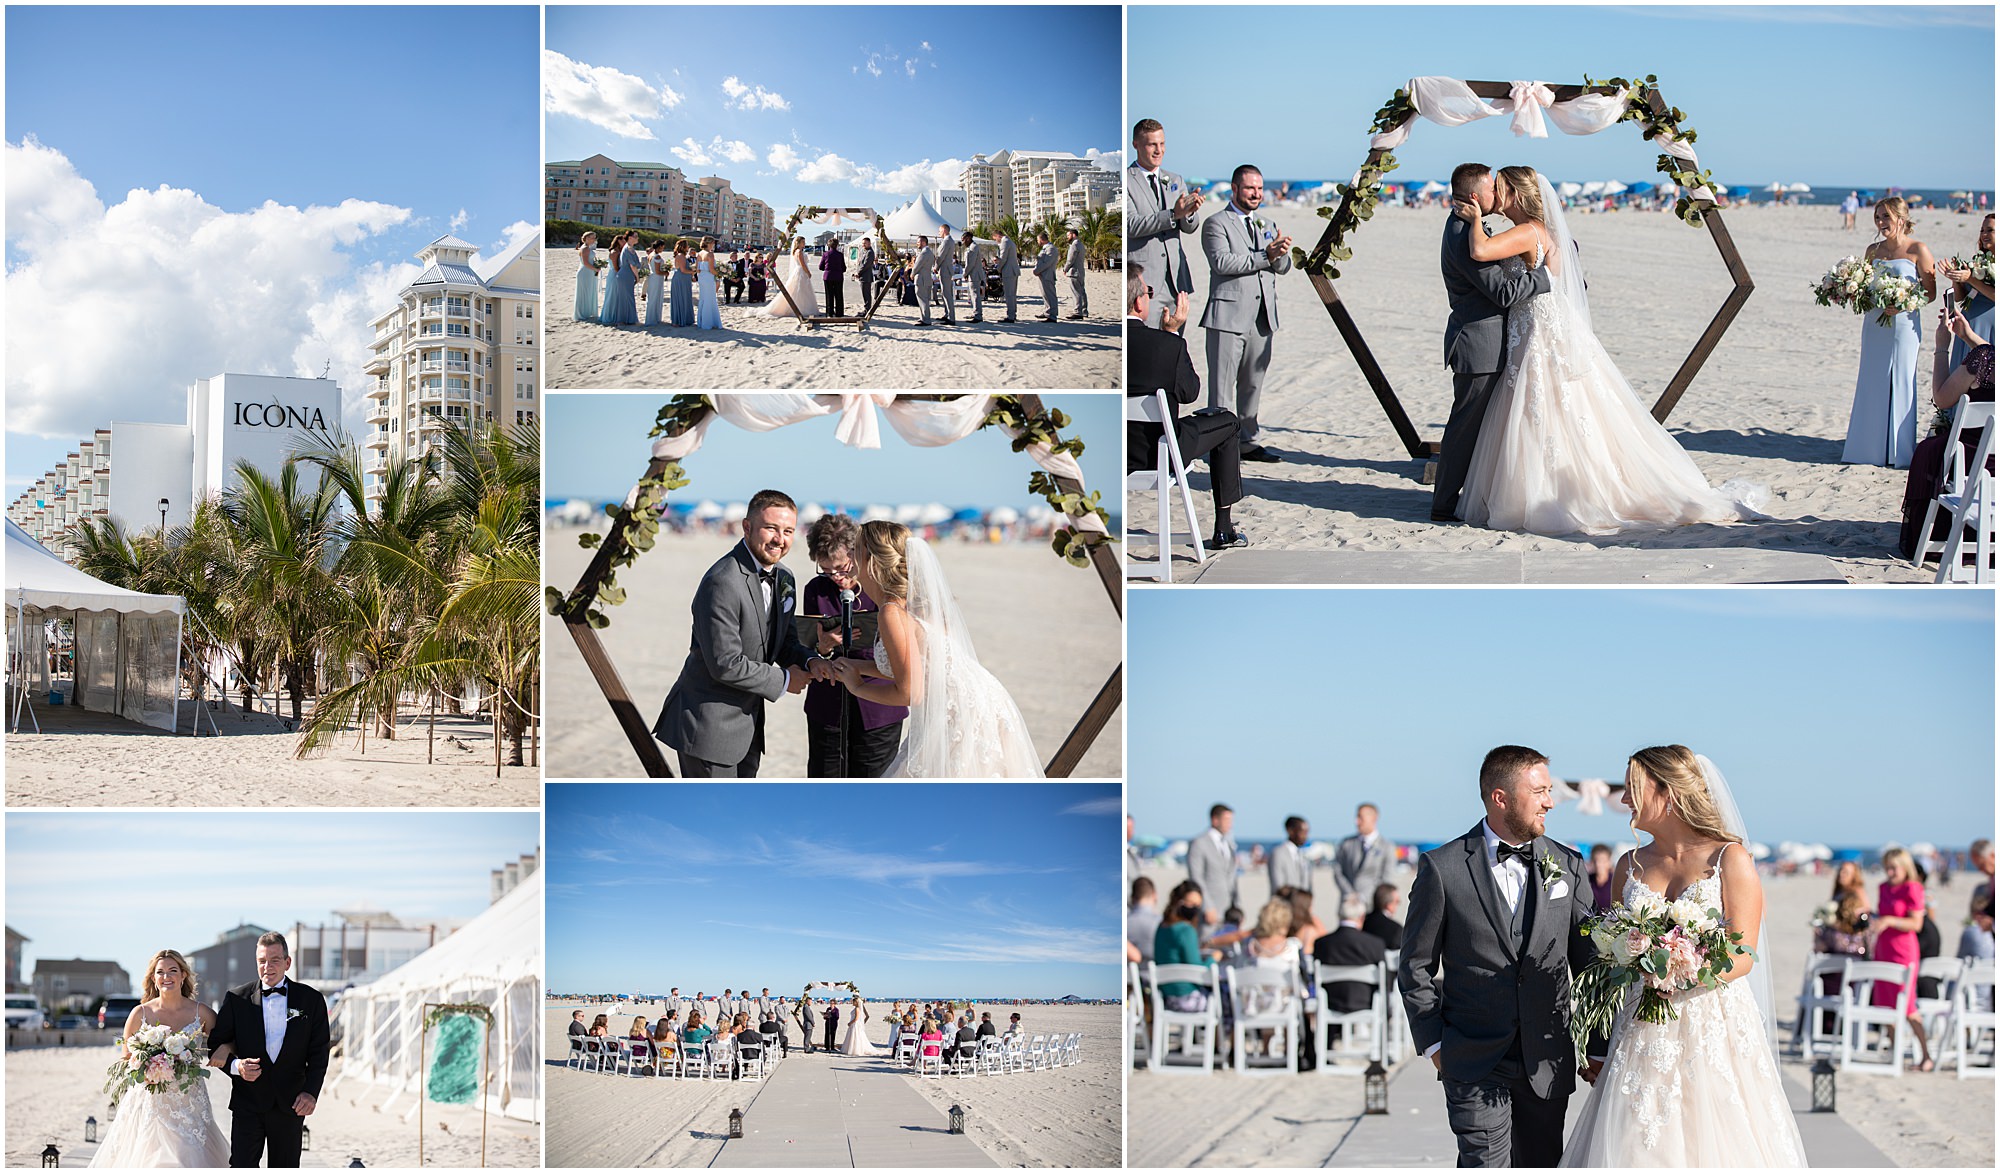 The ceremony site at ICONA Diamond Beach makes it one of the best Jersey Shore wedding venues!